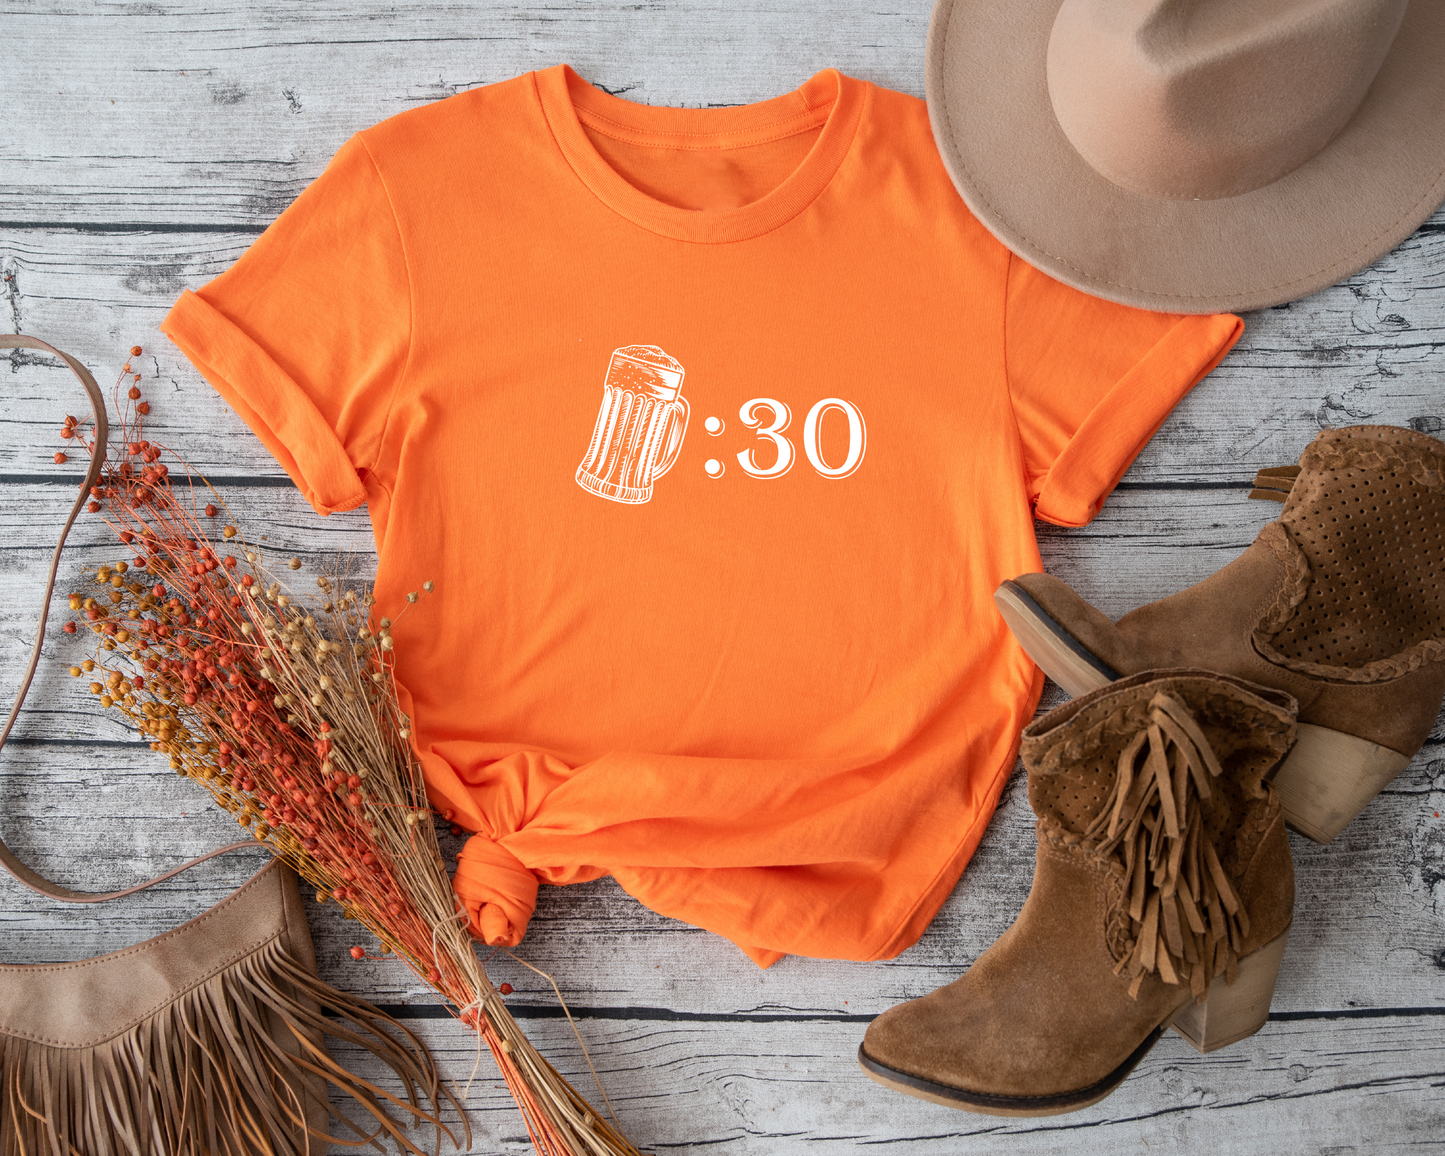 Celebrate the end of the workday with this classic "Beer Thirty" men's t-shirt.